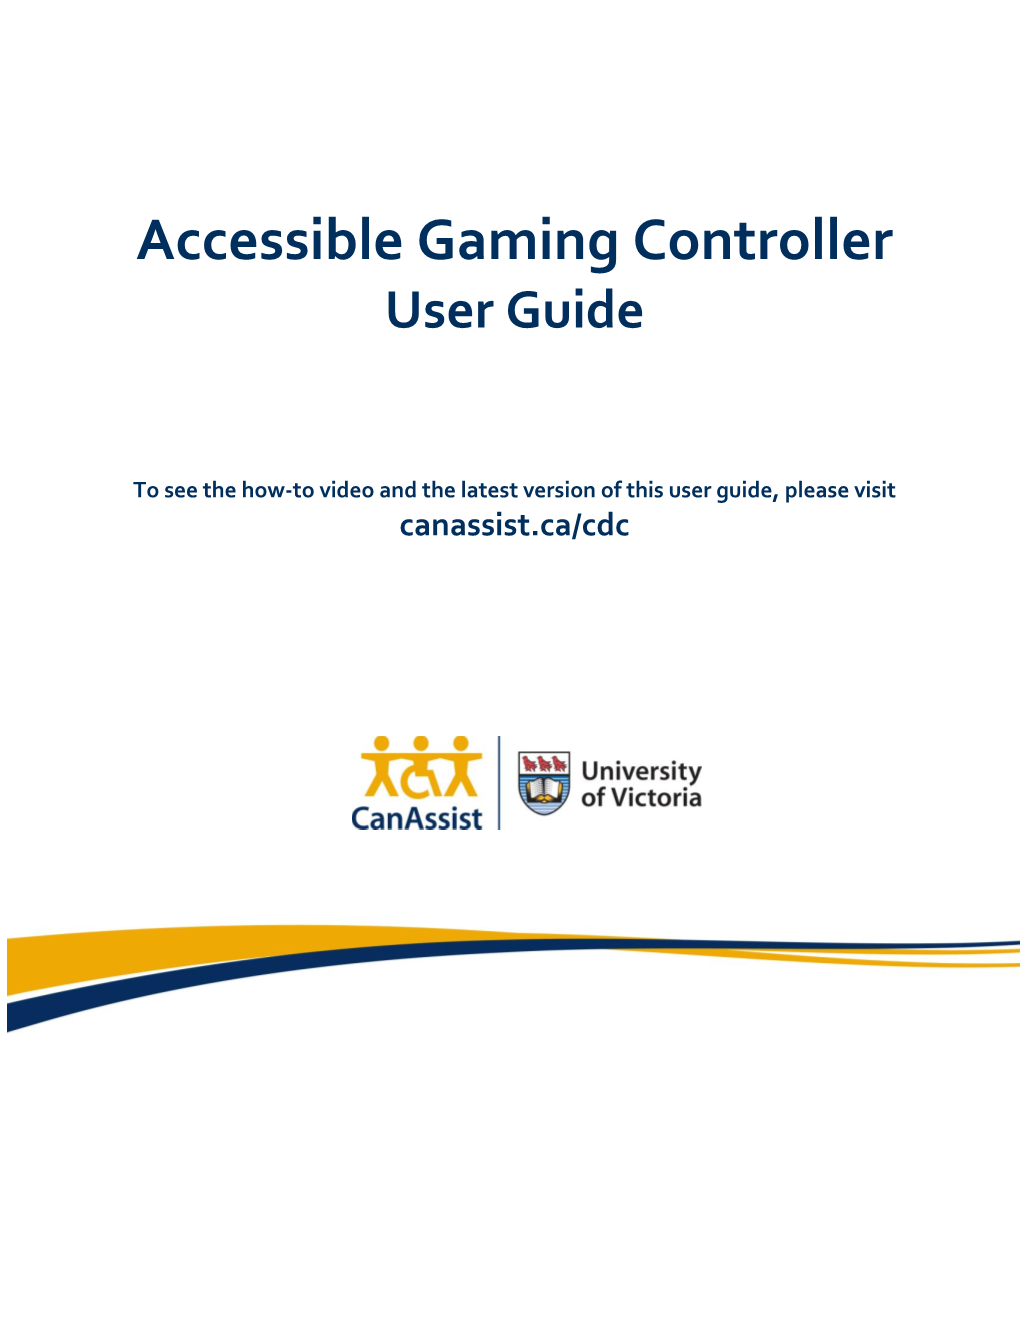 Accessible Gaming Controller User Guide